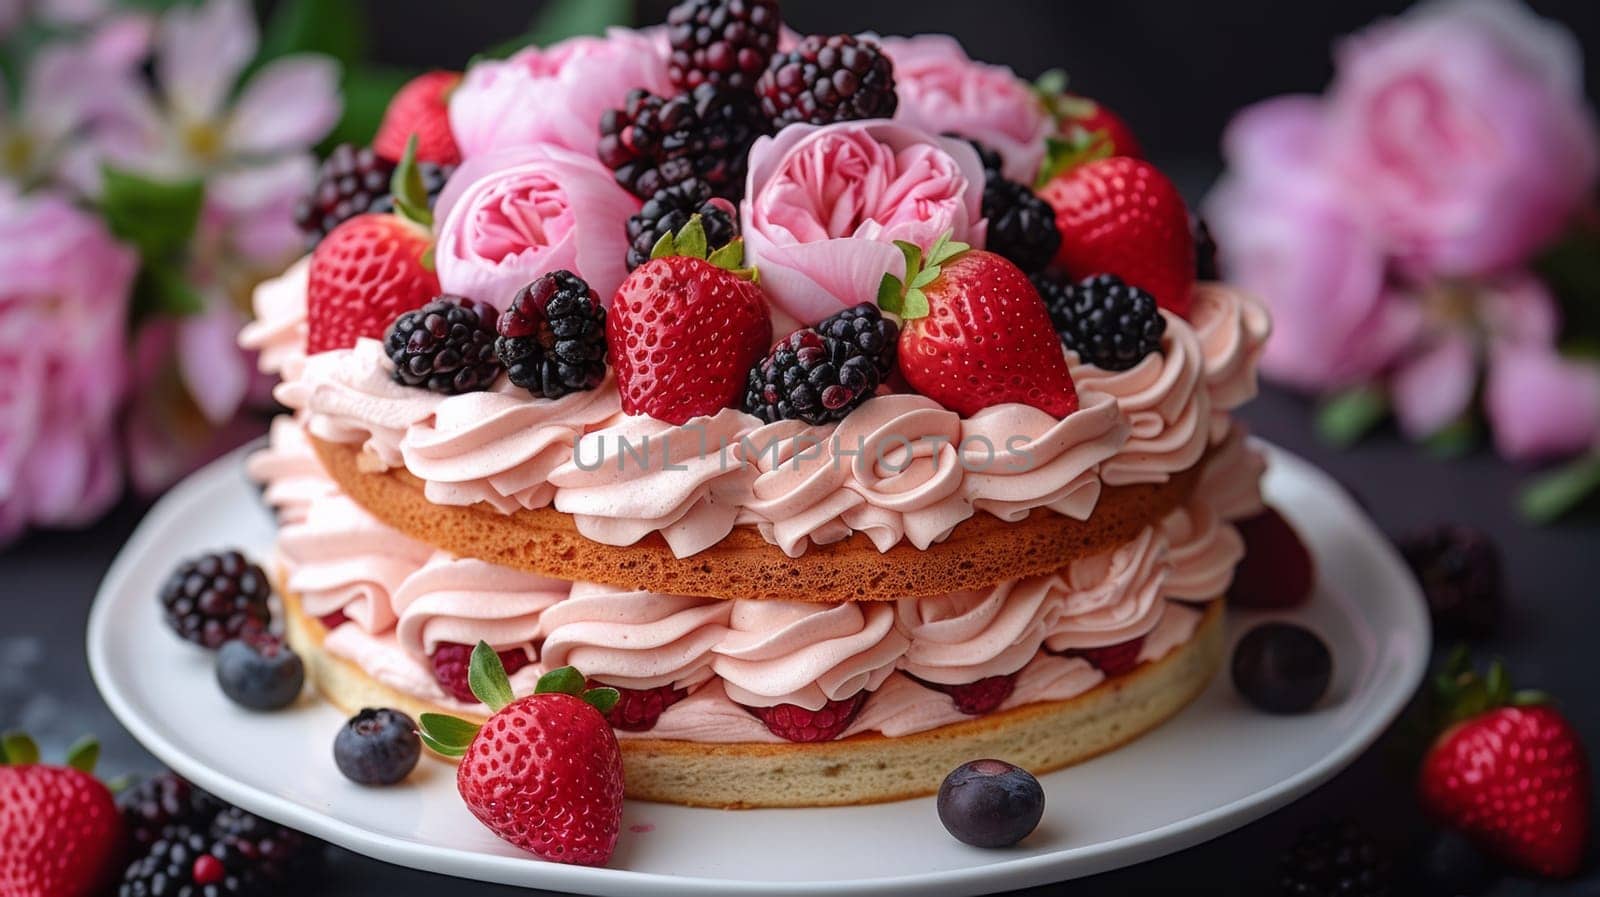 A close up of a cake with berries and cream on top